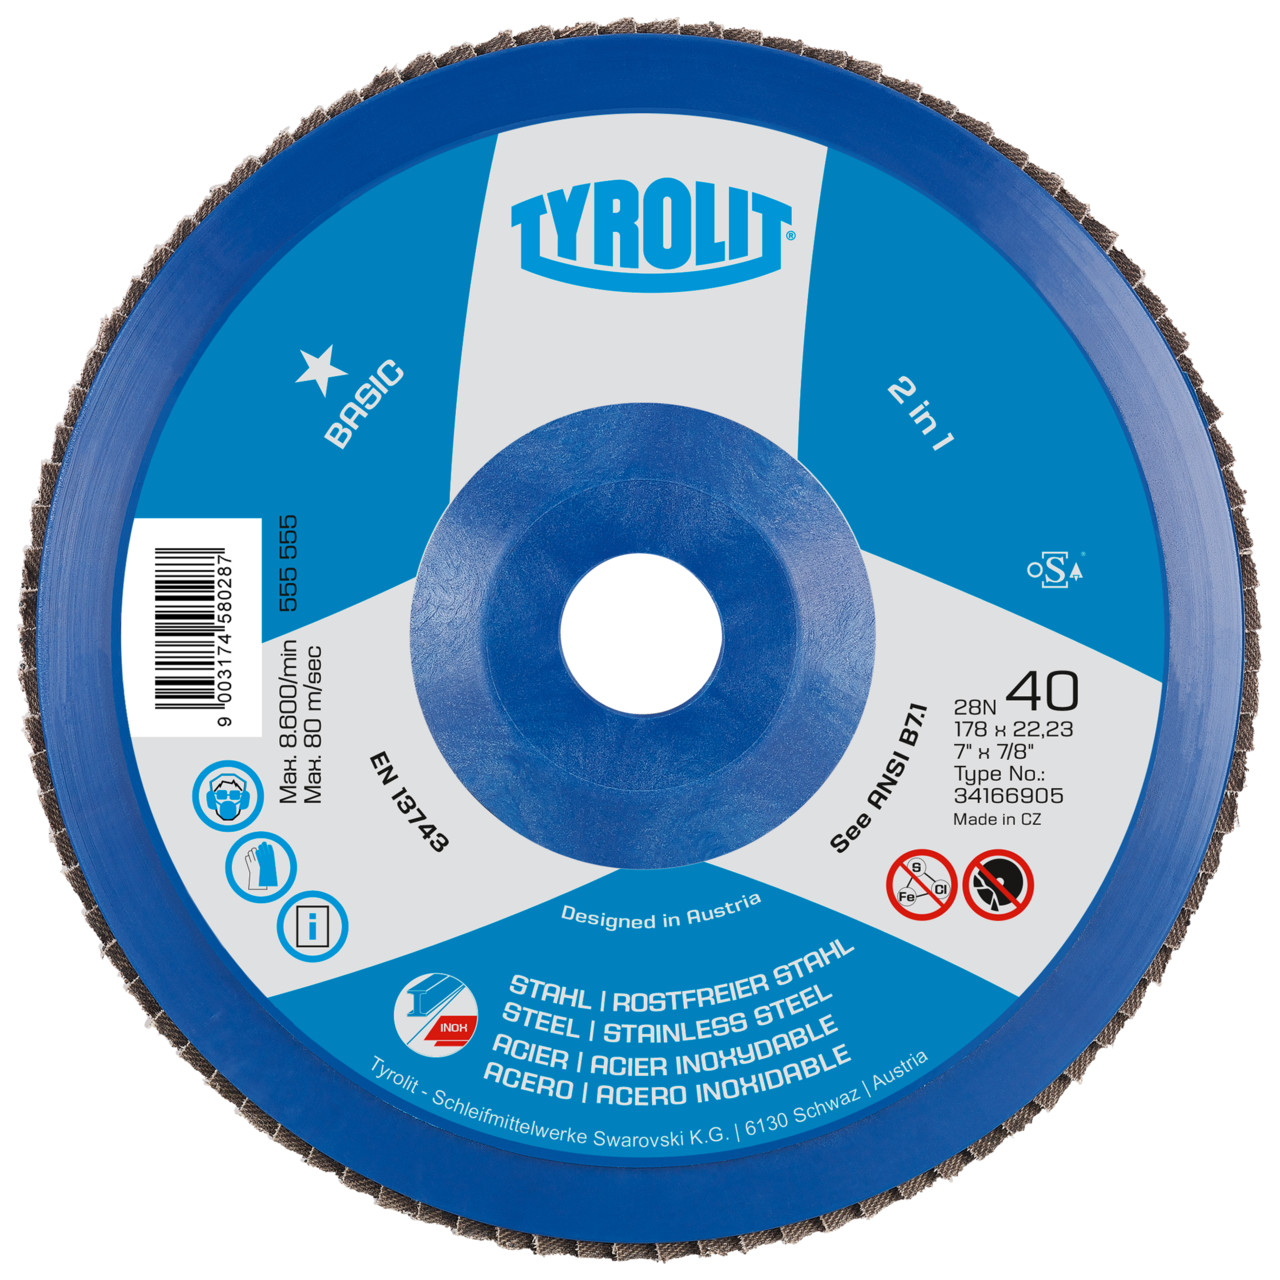 Tyrolit Serrated lock washer DxH 115x22.23 2in1 for steel &amp; stainless steel, P80, shape: 28N - straight version (plastic carrier body), Art. 34318570